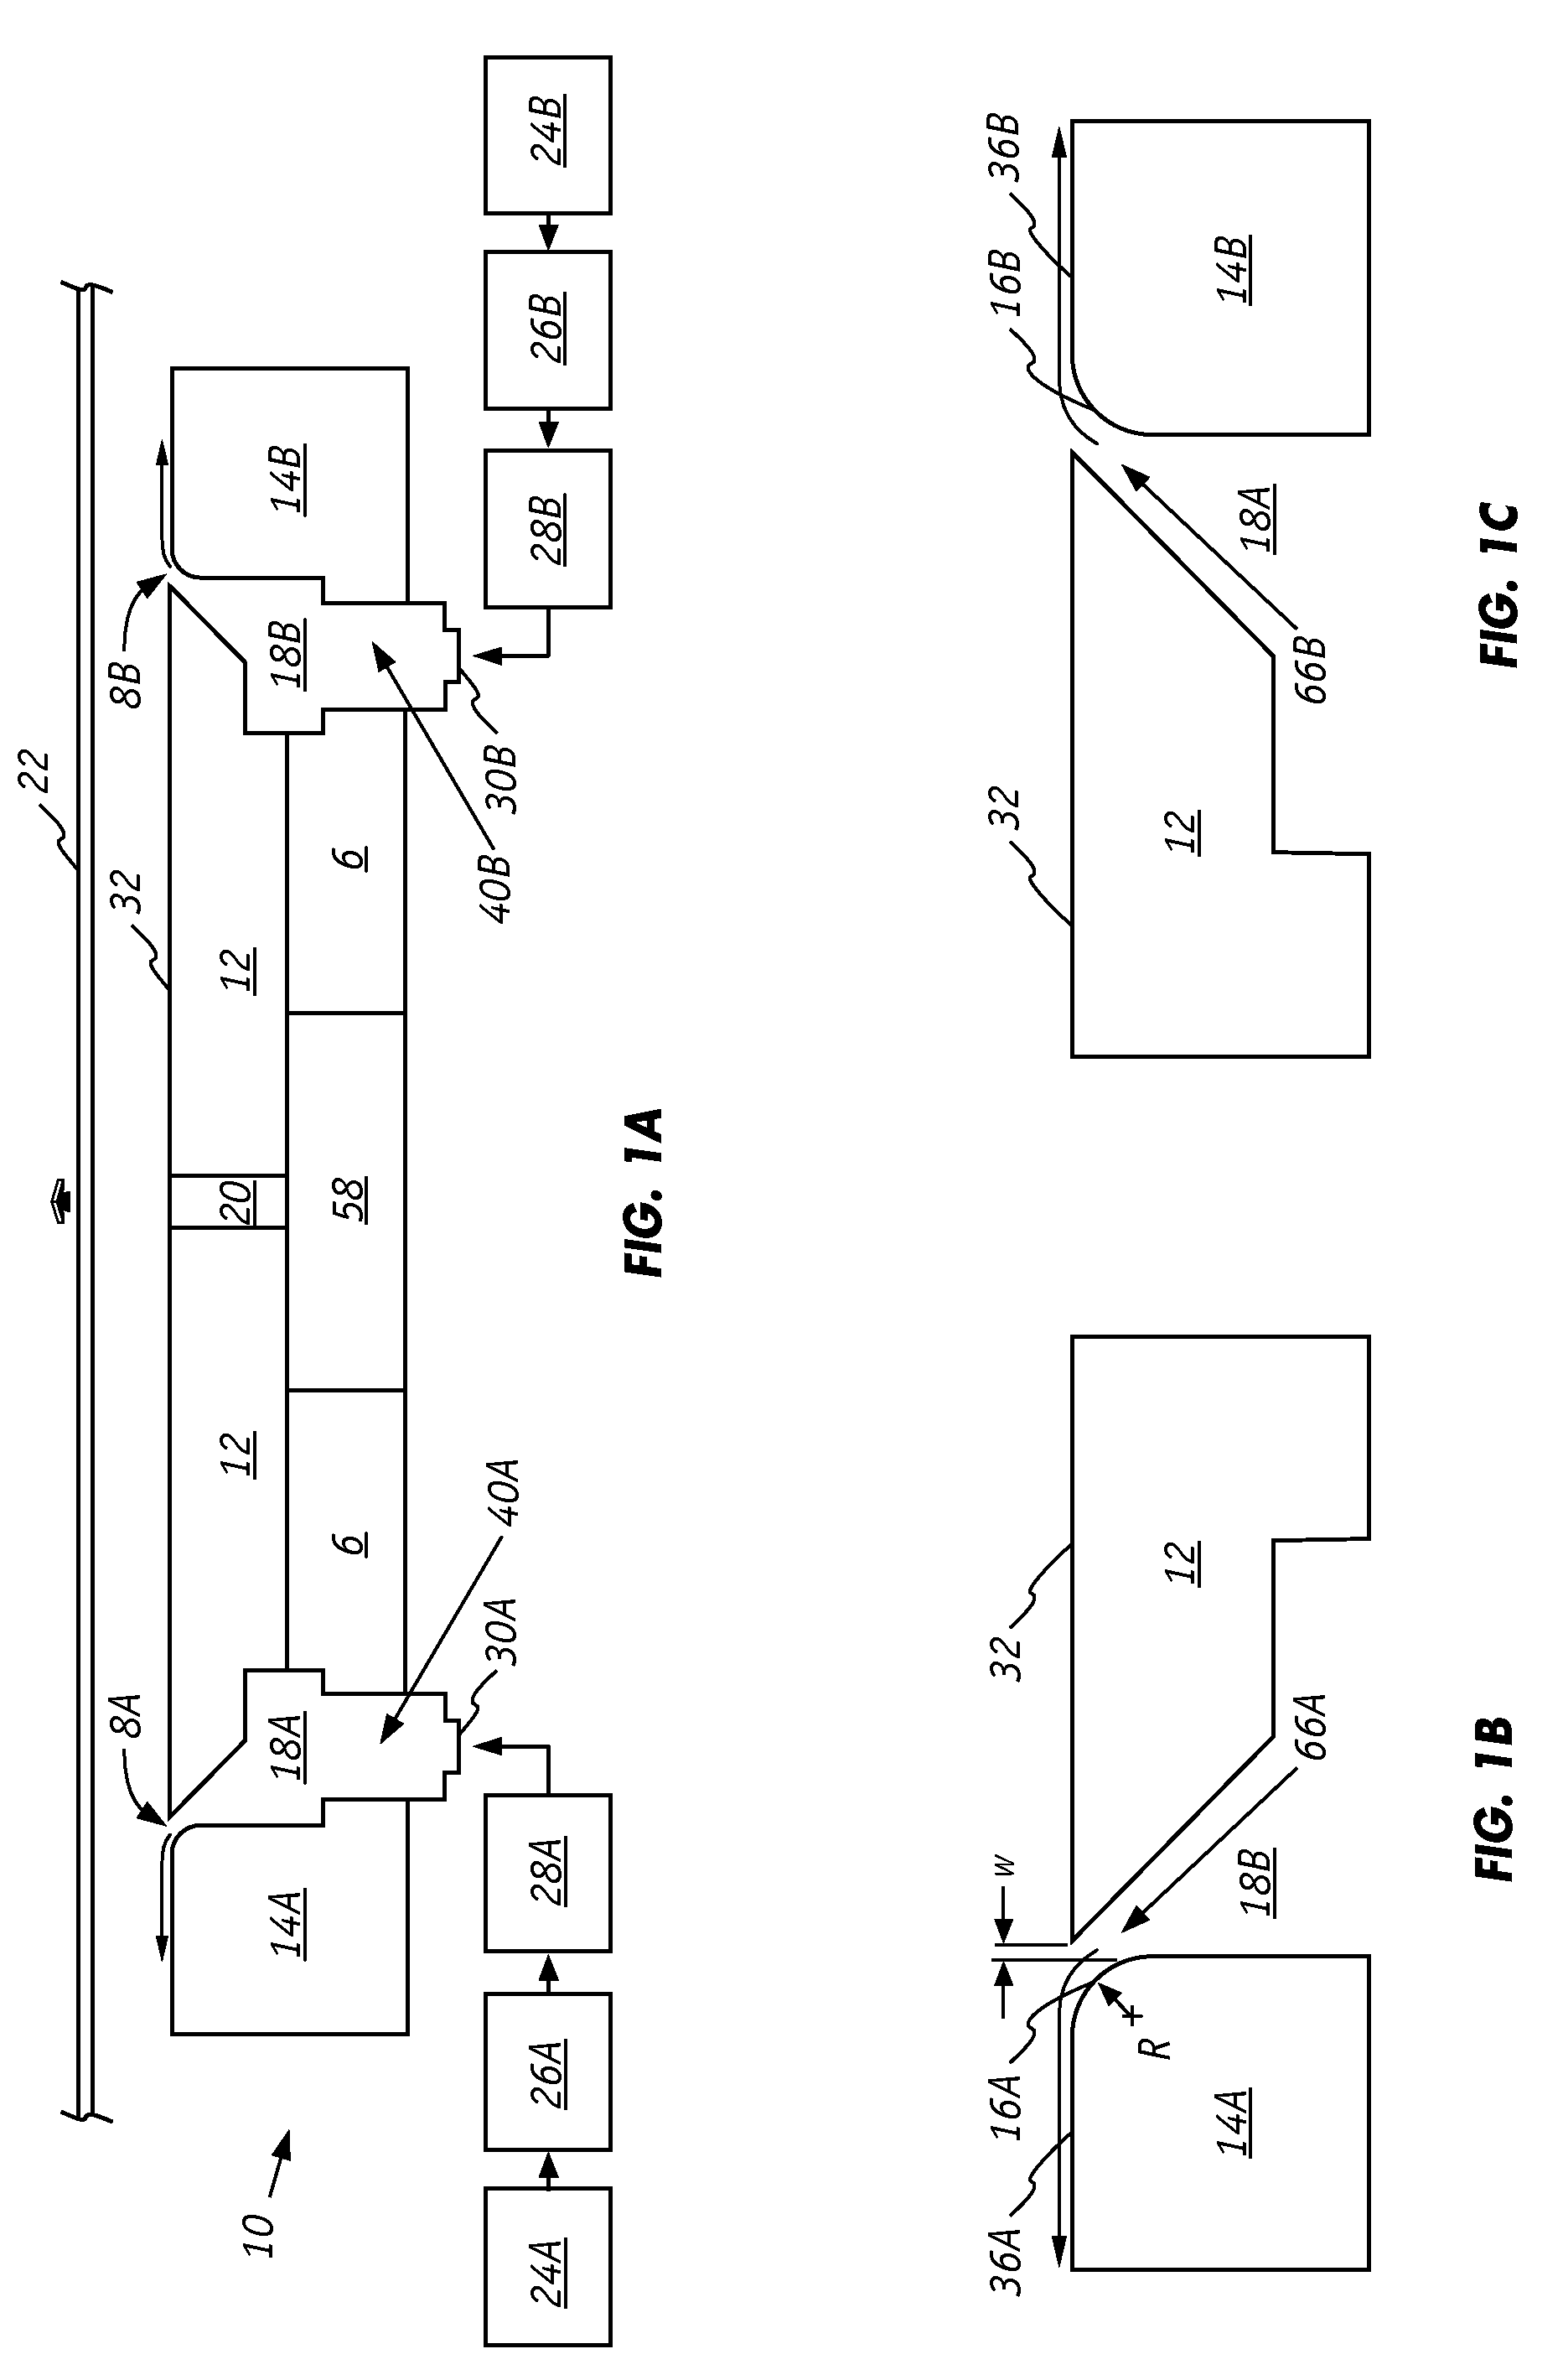 Sheet stabilization with dual opposing cross direction air clamps